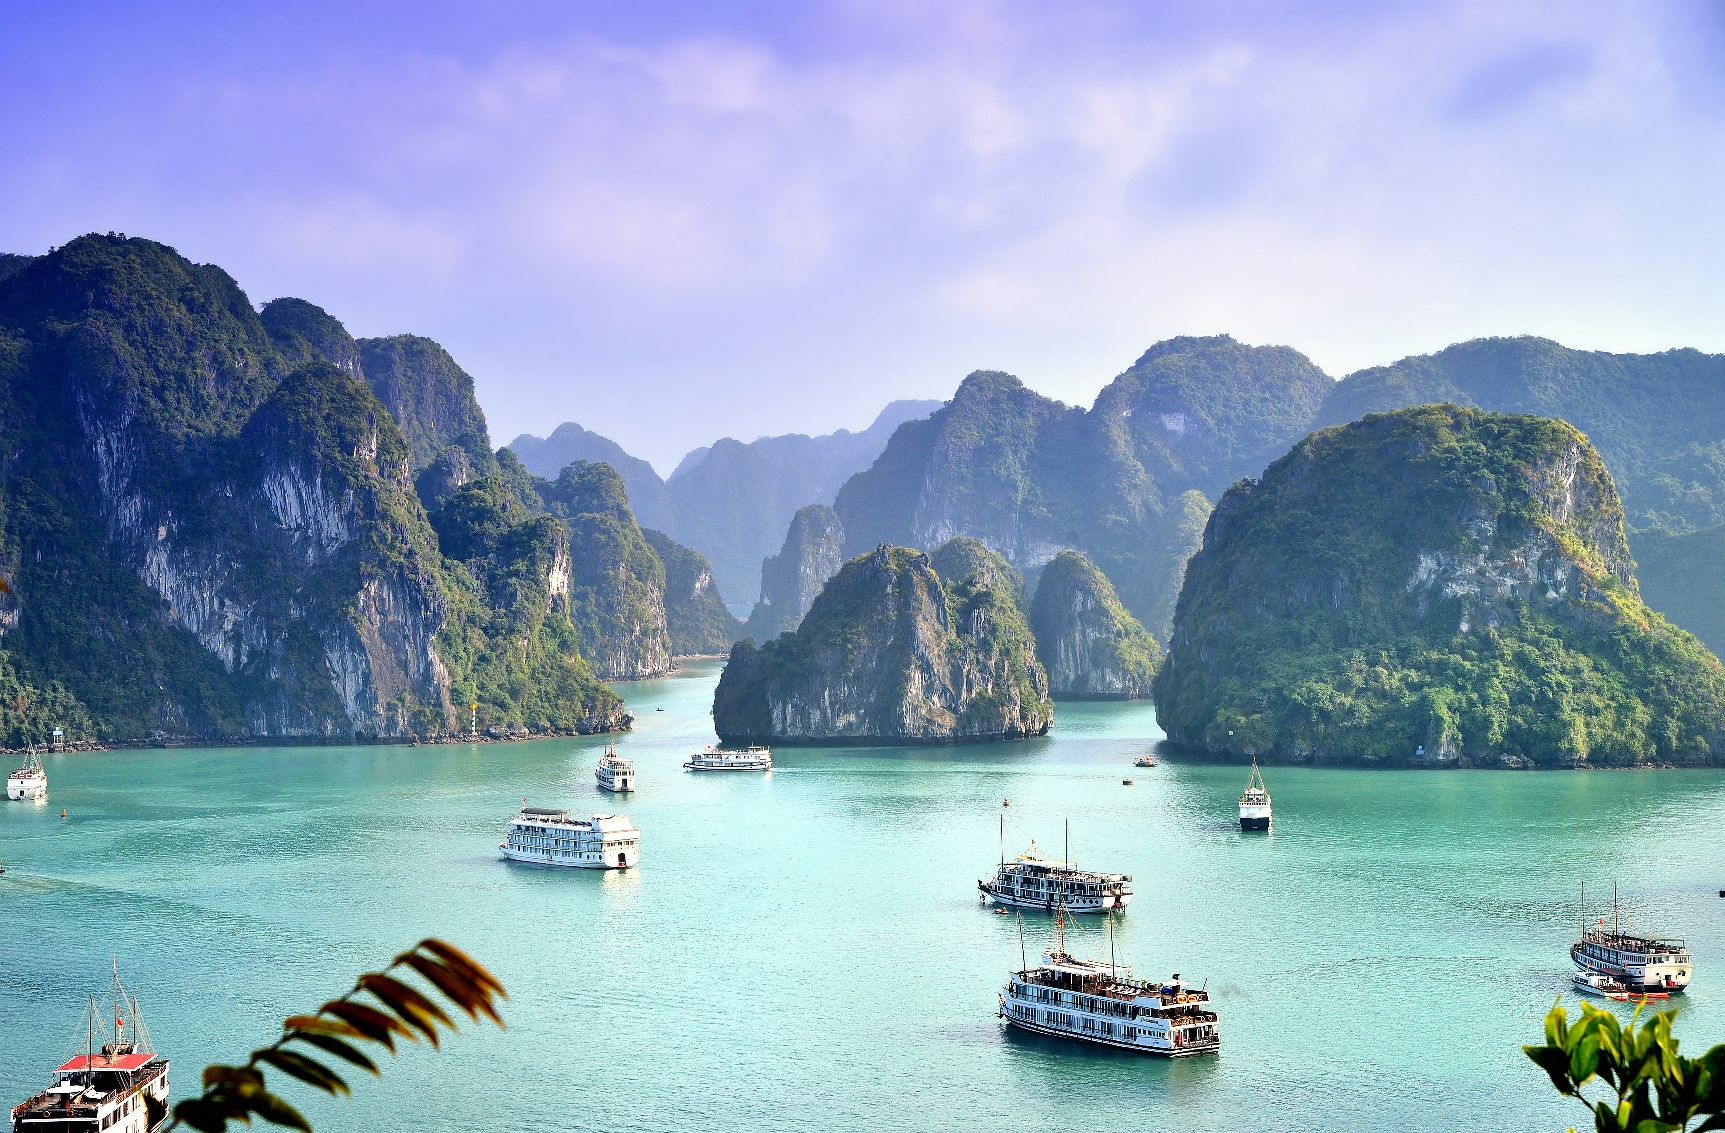 Discover the beauty and serenity of Halong Bay, Vietnam with our unique tour experiences